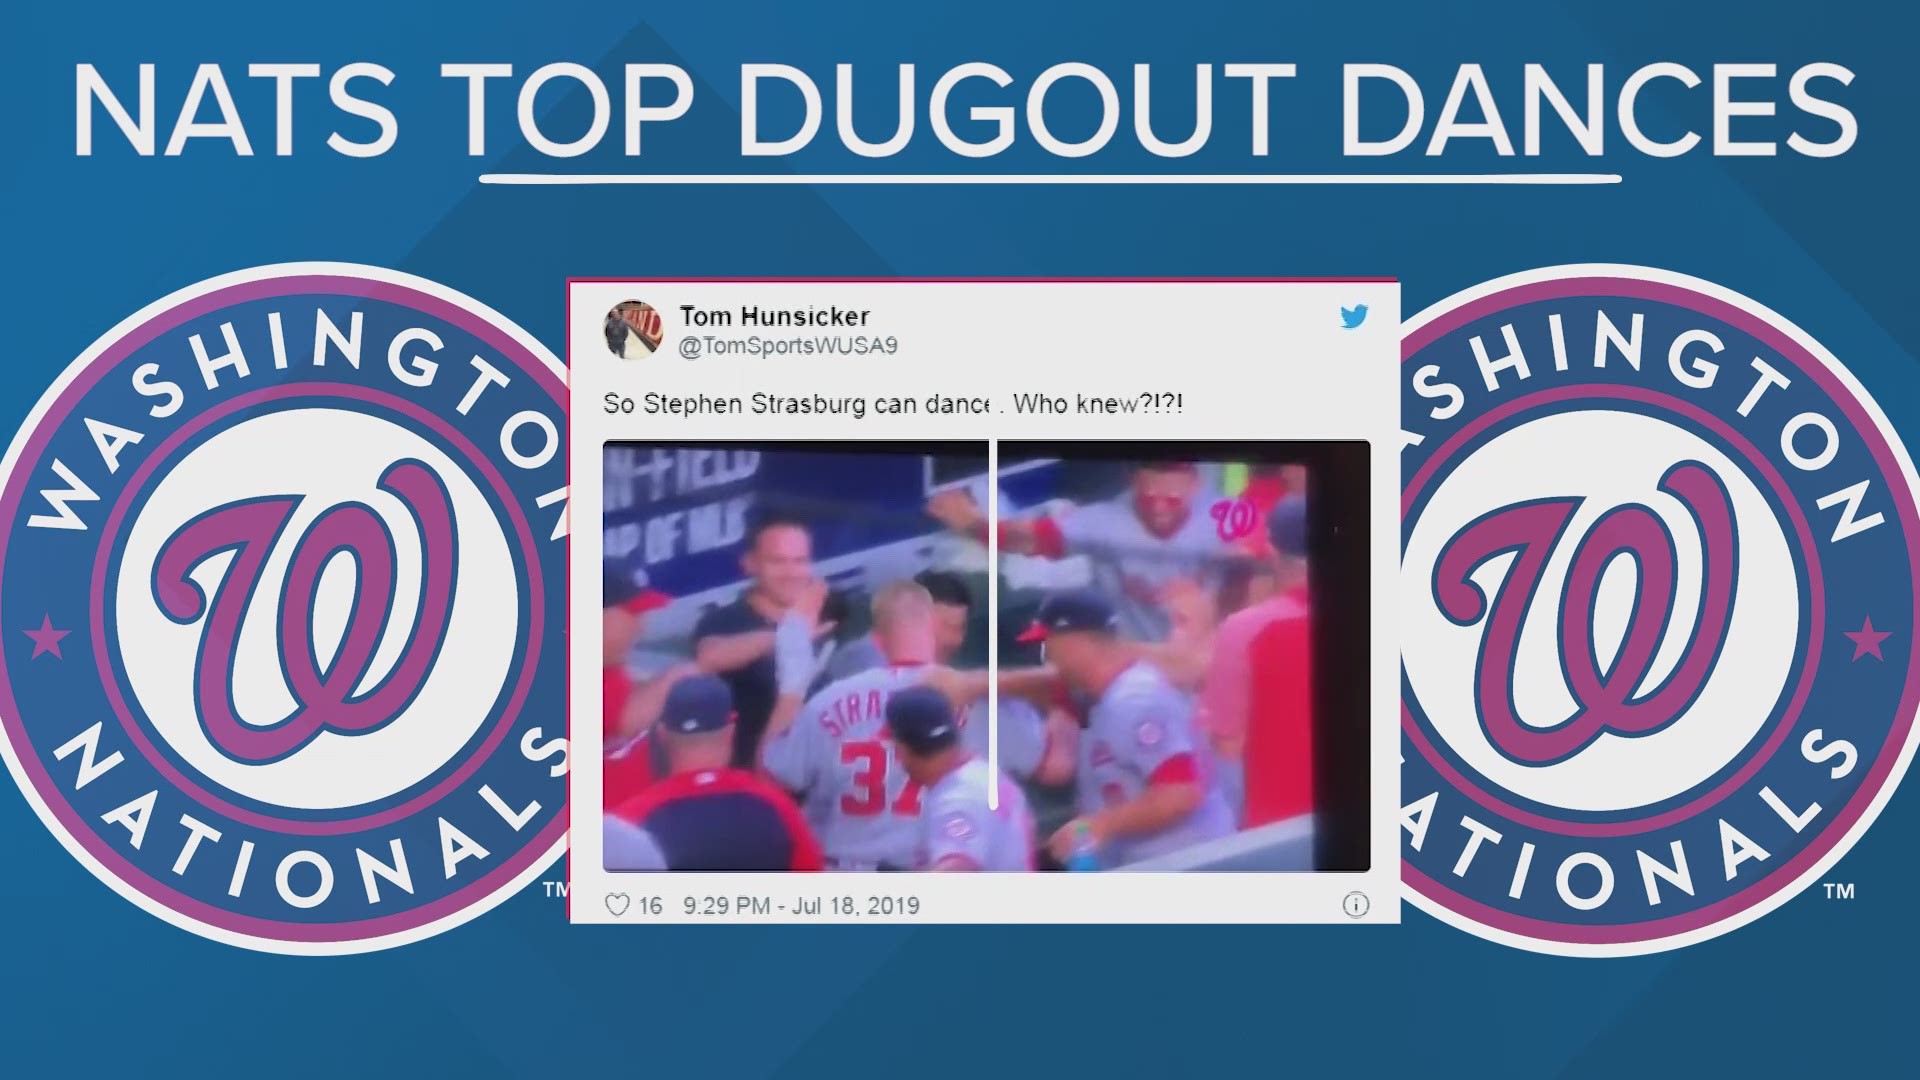 The Nationals's dugout dance parties are so much fun!